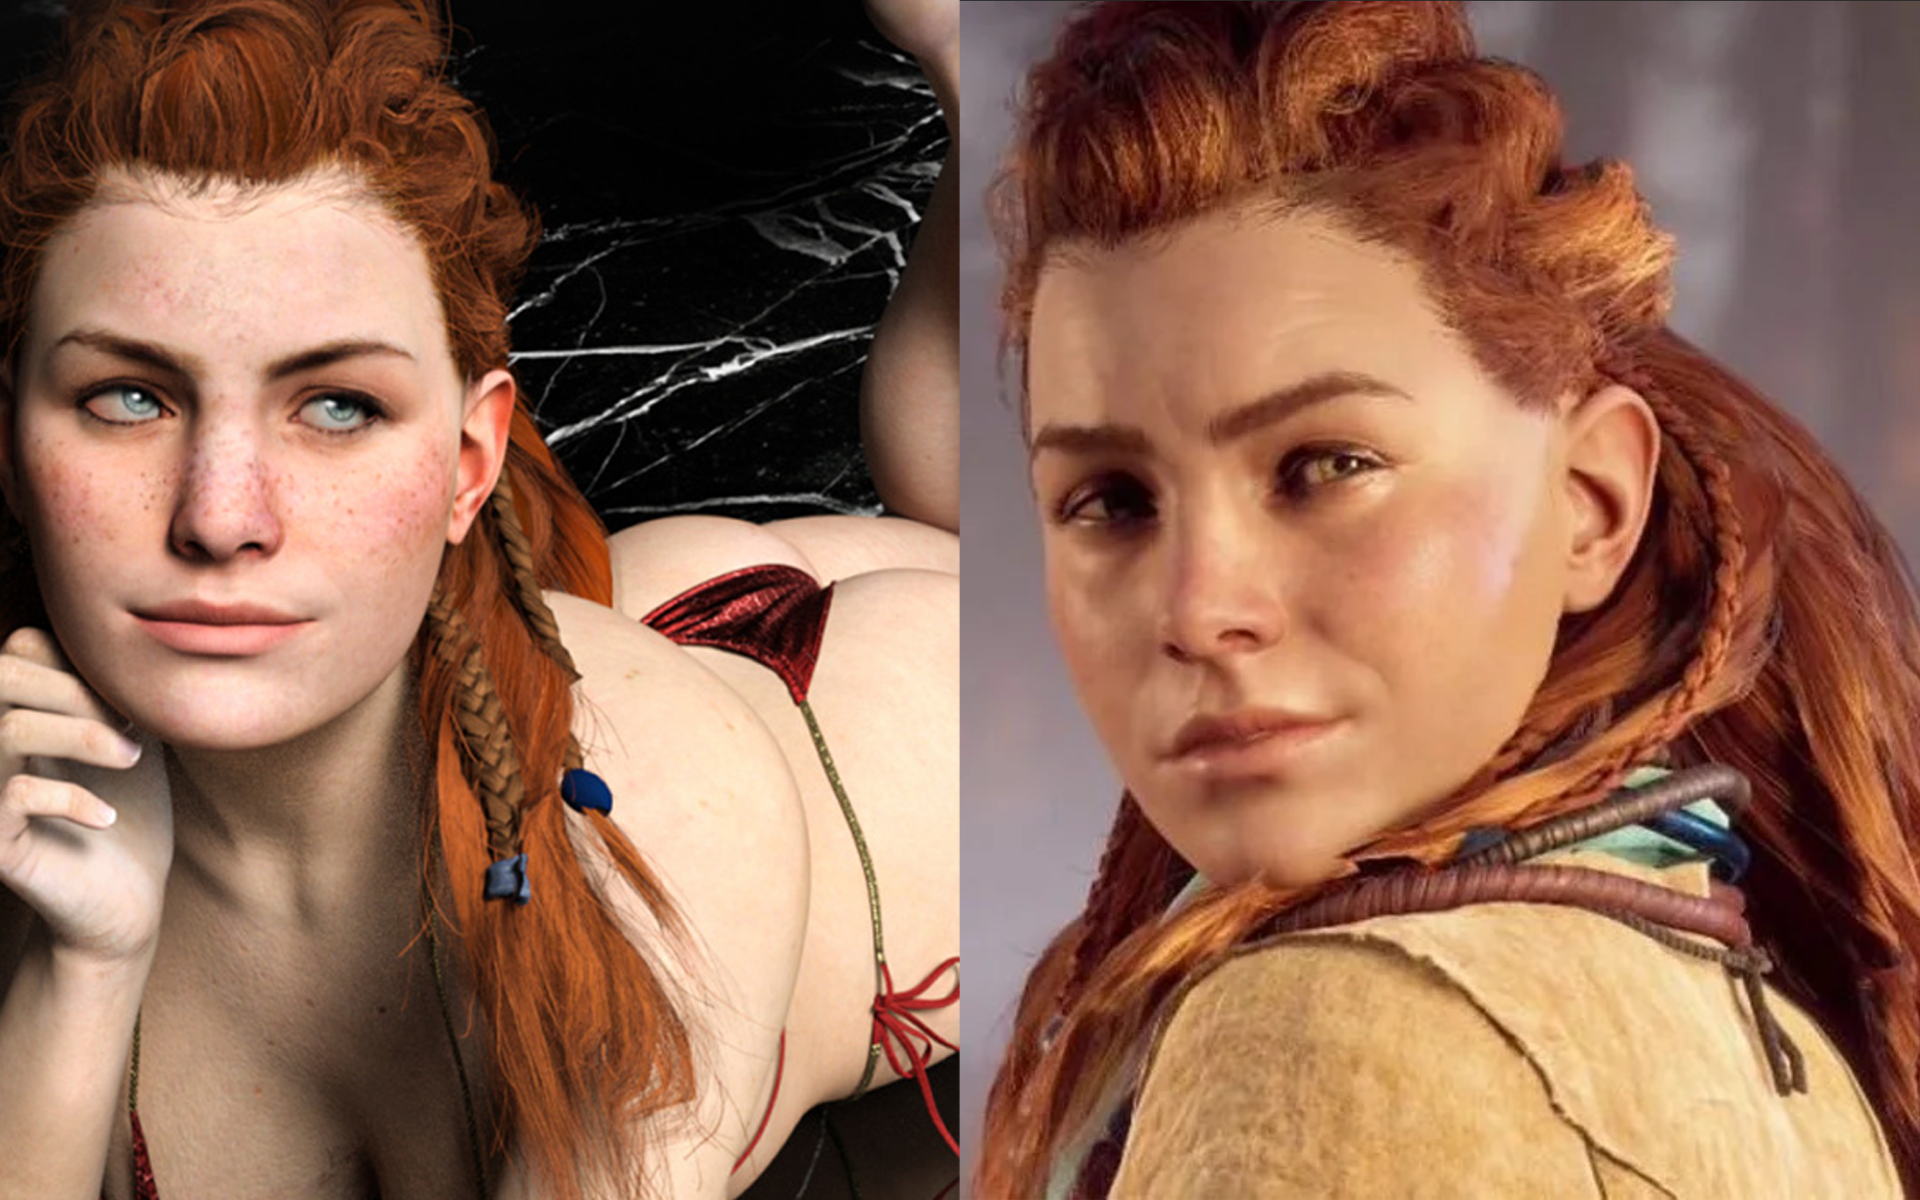 Developer Claims Sony Forced Them To Create Porn Of Horizon Protagonist Aloy To Compete With Rival IP